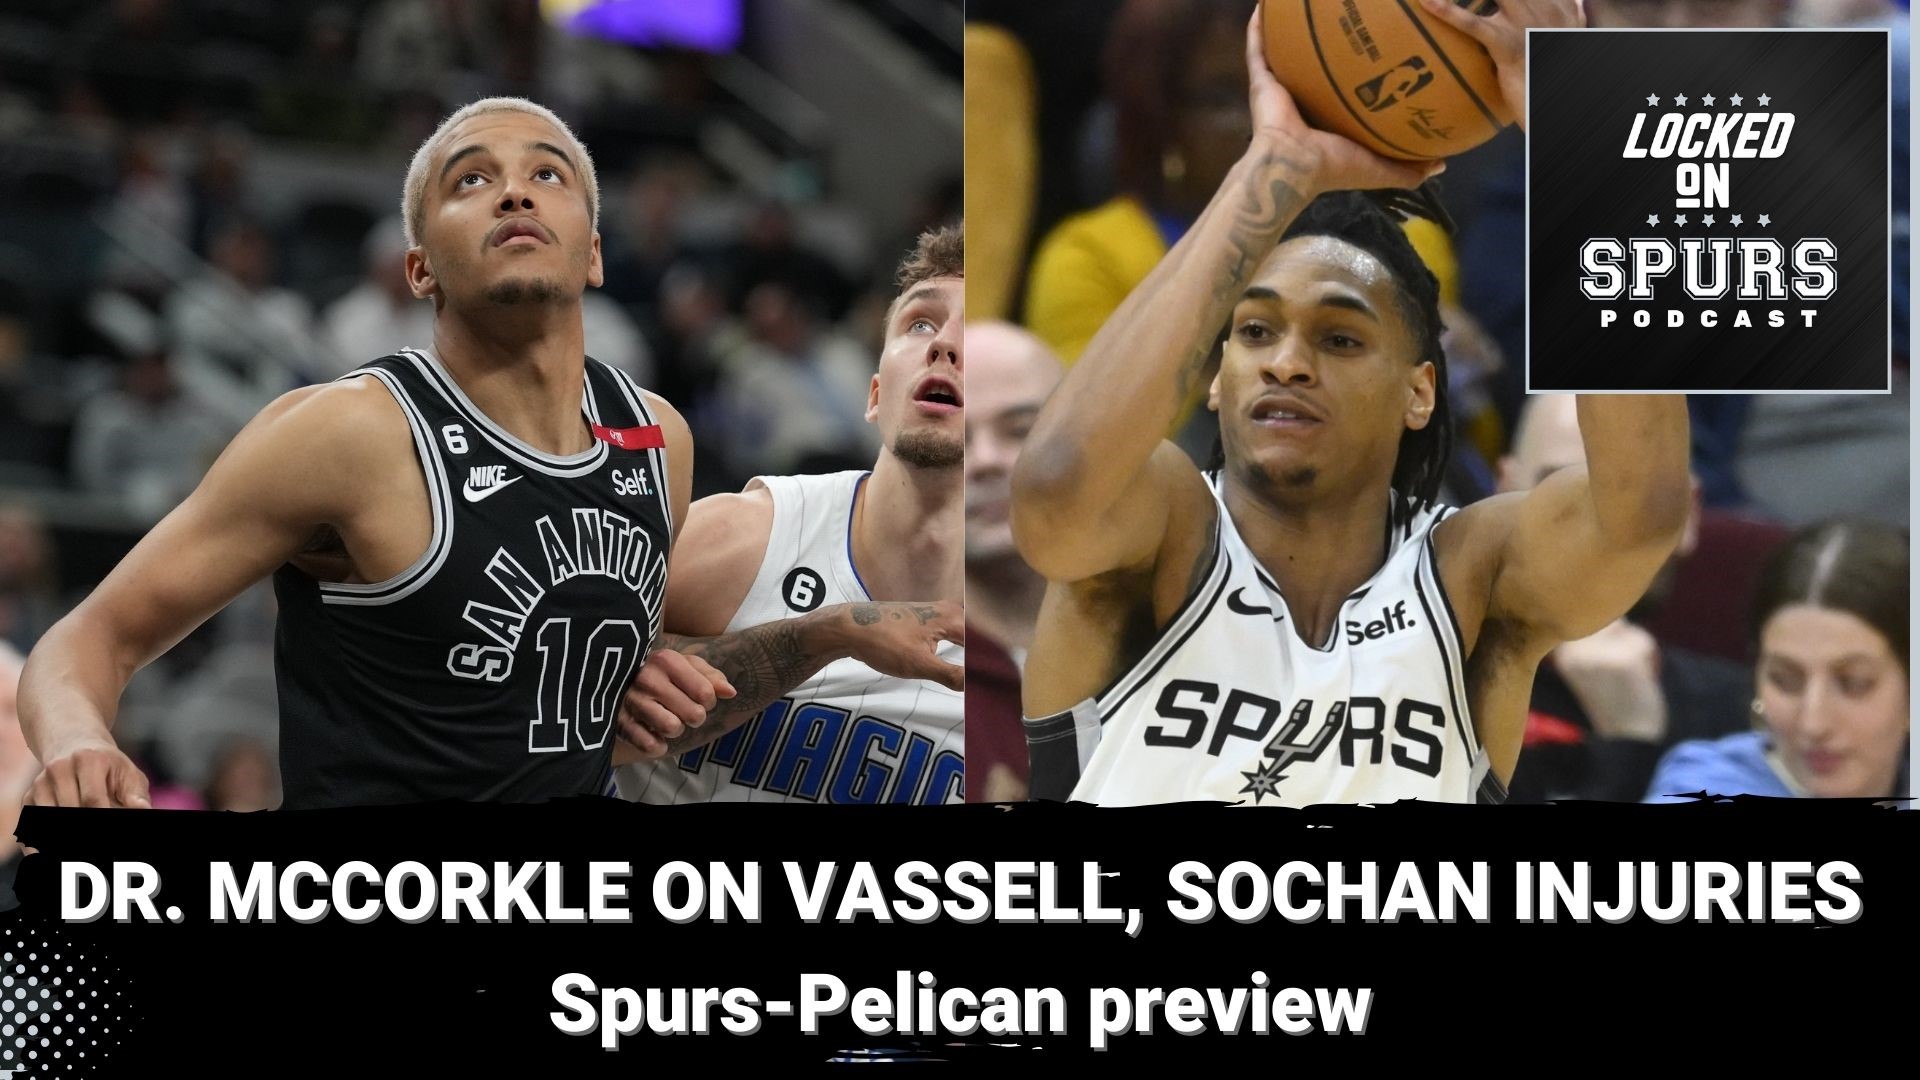 Also, a Spurs-Pelicans game preview.